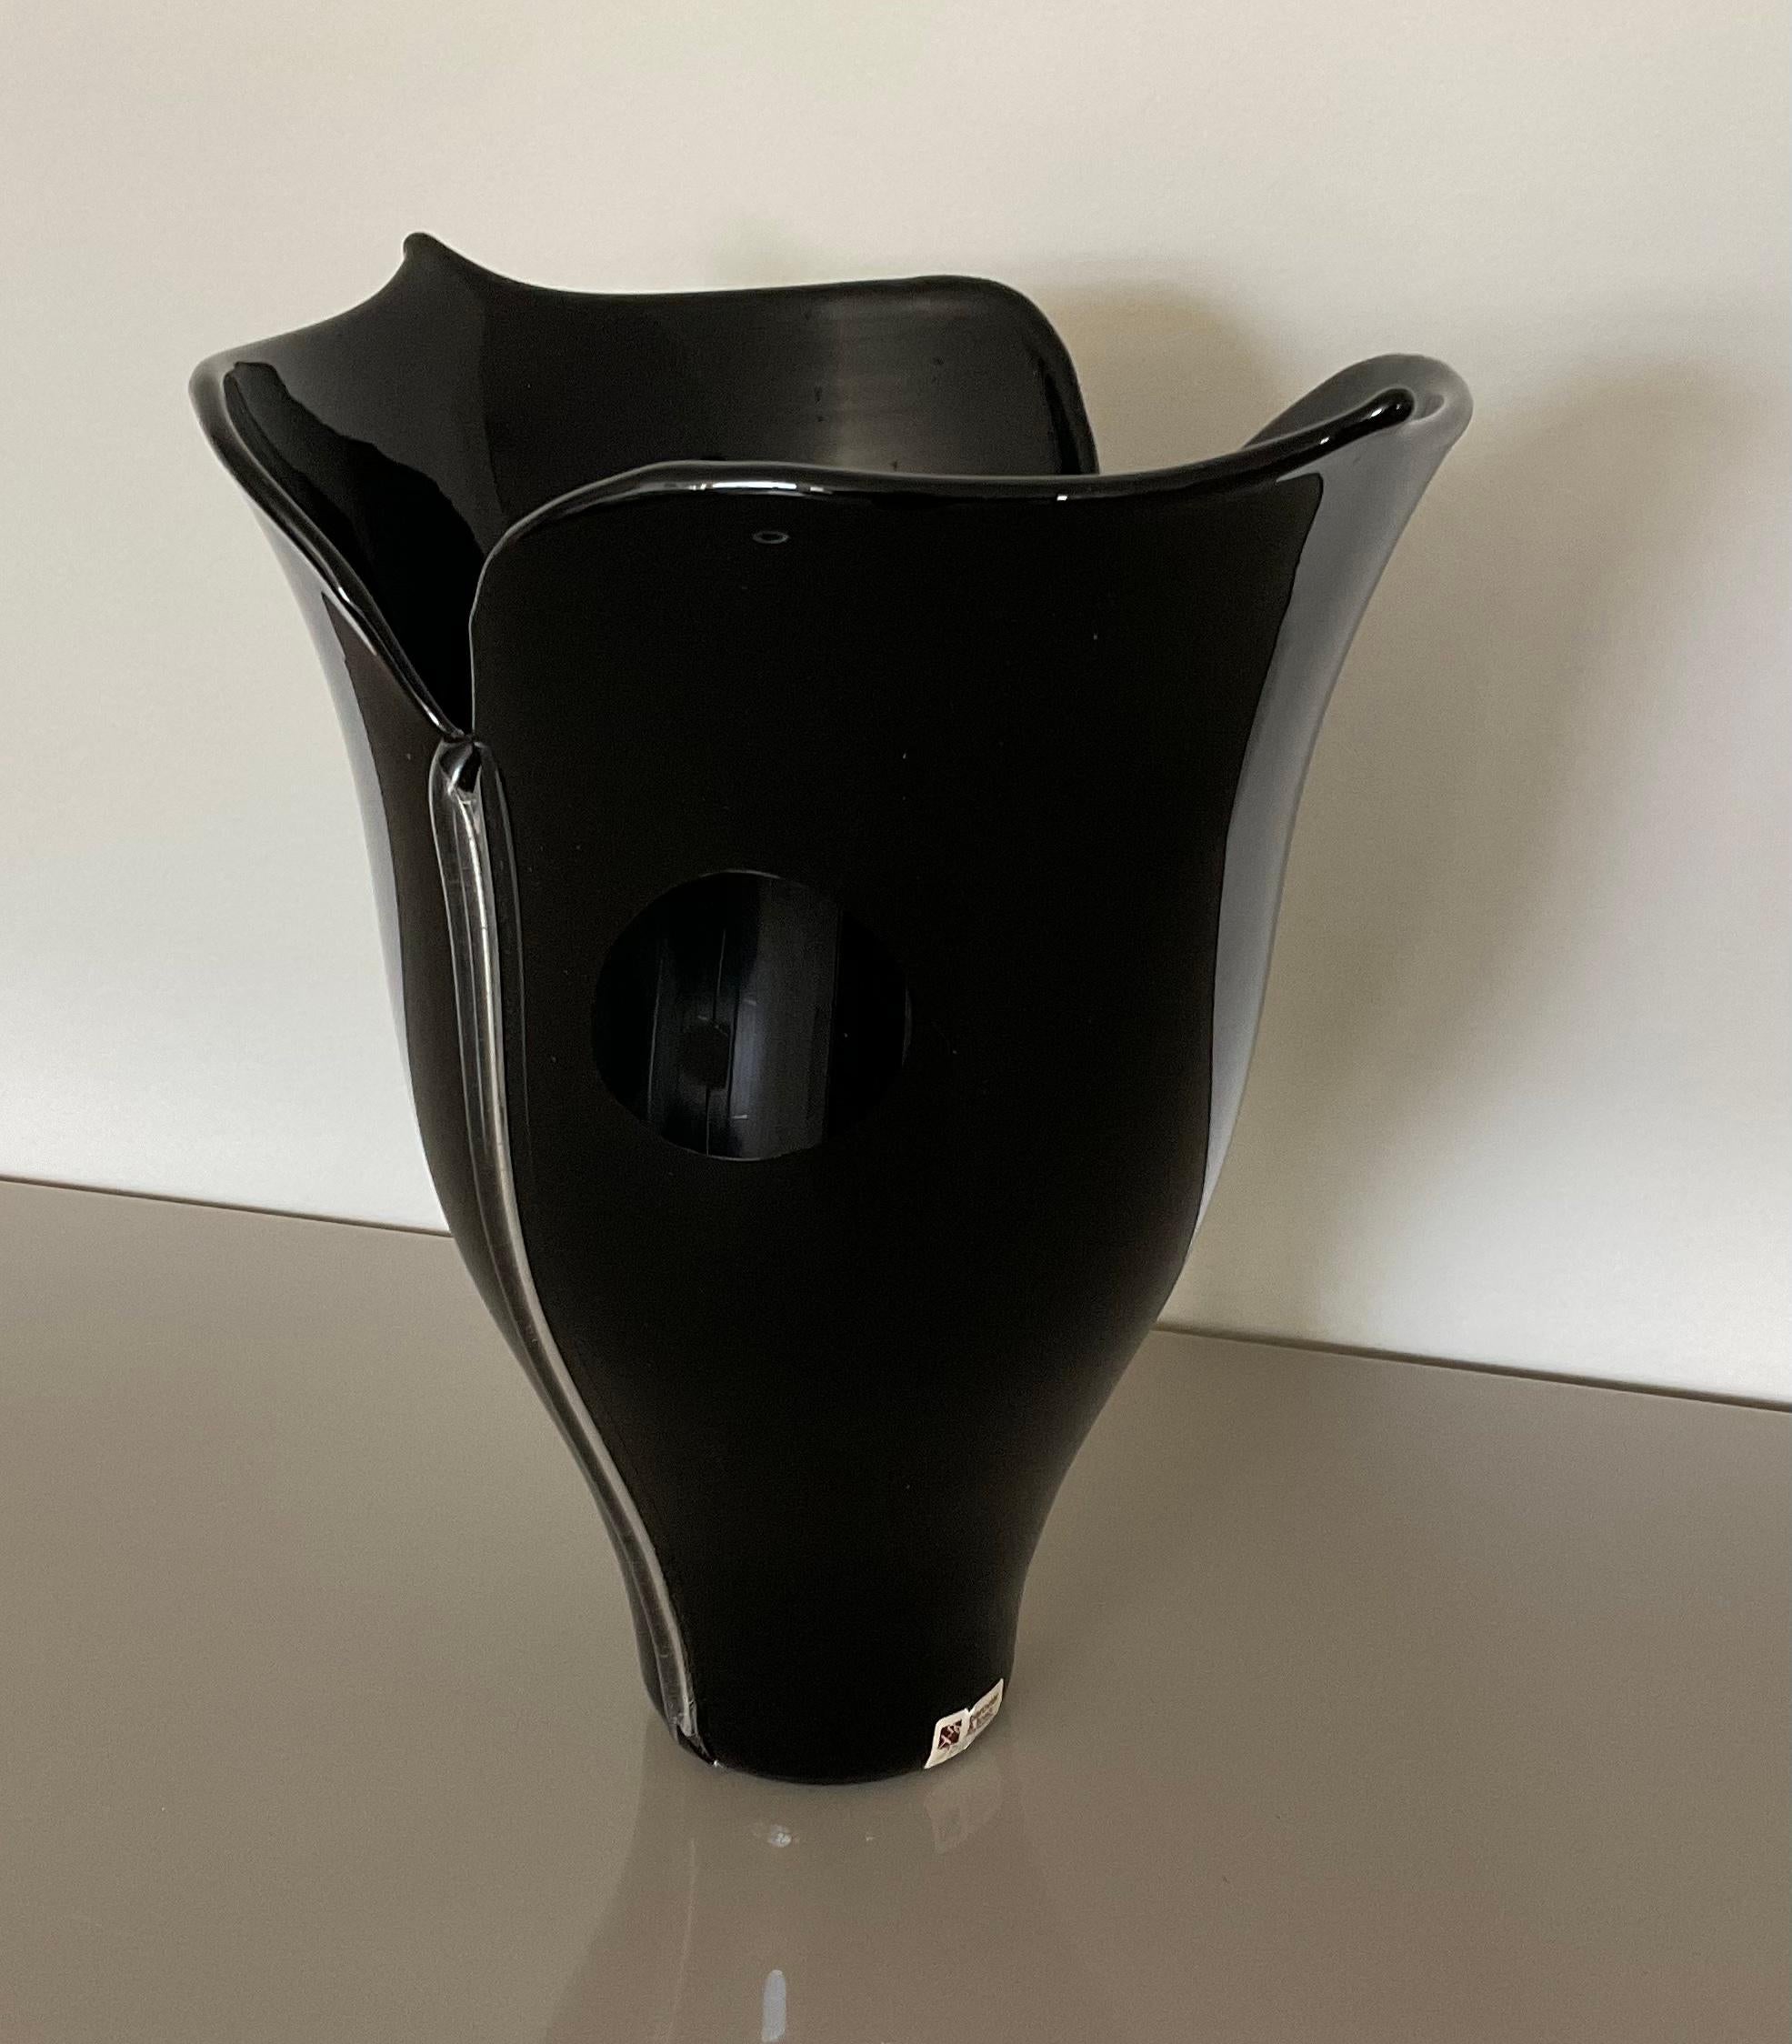 Rare Minassia Murano vase designed for Barovier and Toso by Toni Zuccheri 1982. The vase is signed with an original label and signature. Reference Minassia series Murano Glass Museum.